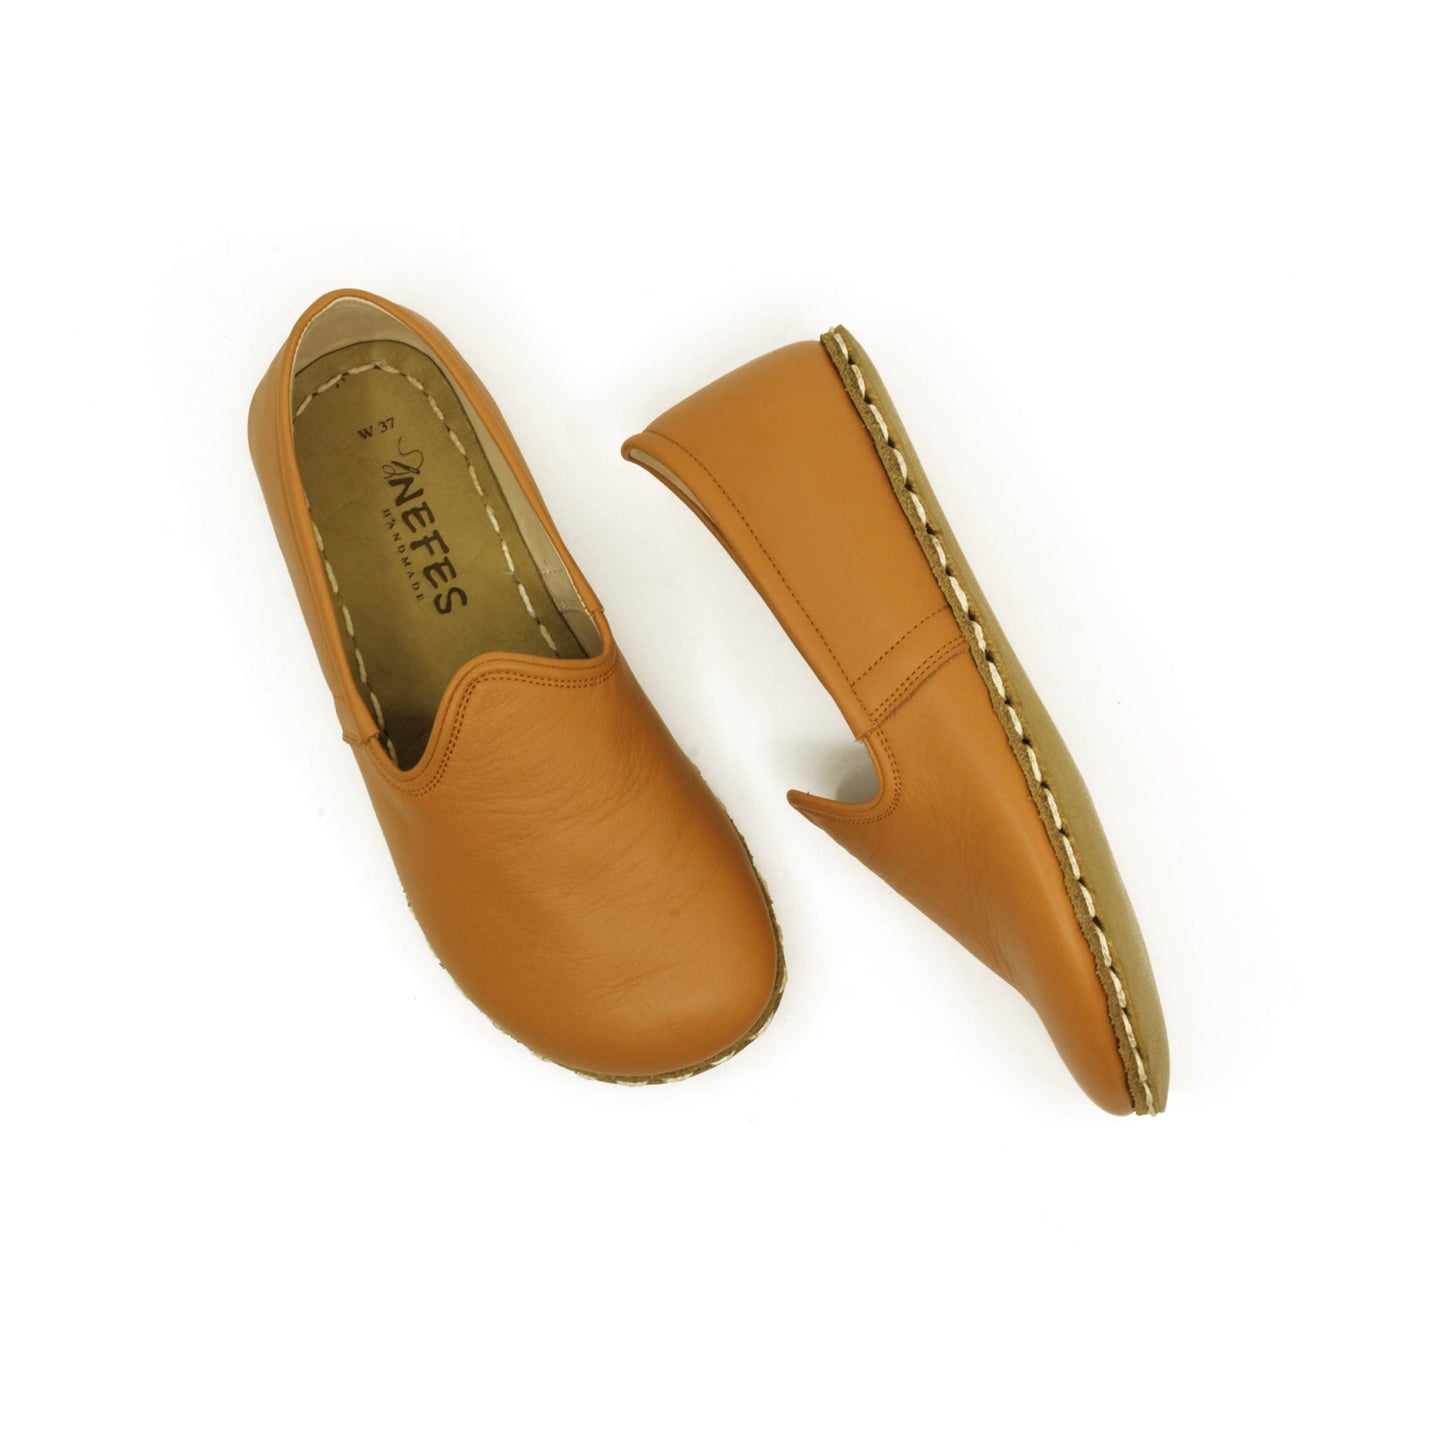 Turkish Yemeni-Style Orange Flat Leather Women's Barefoot Shoes - Cute and Flexible Loafers for Everyday Wear